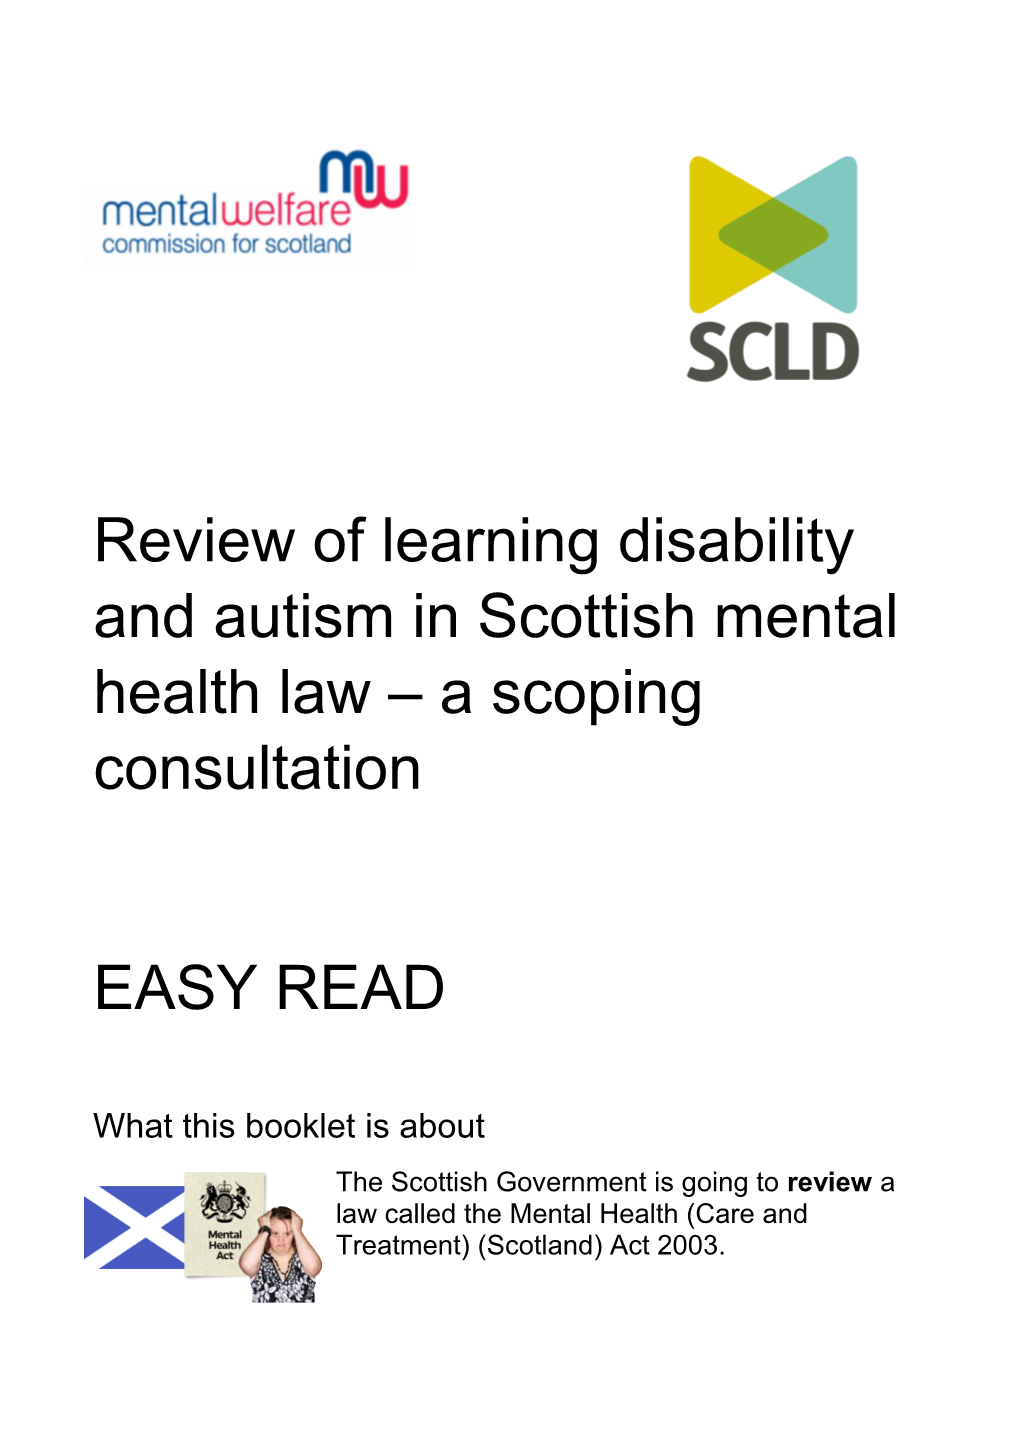 Review of Learning Disability and Autism in Scottish Mental Health Law a Scoping Consultation